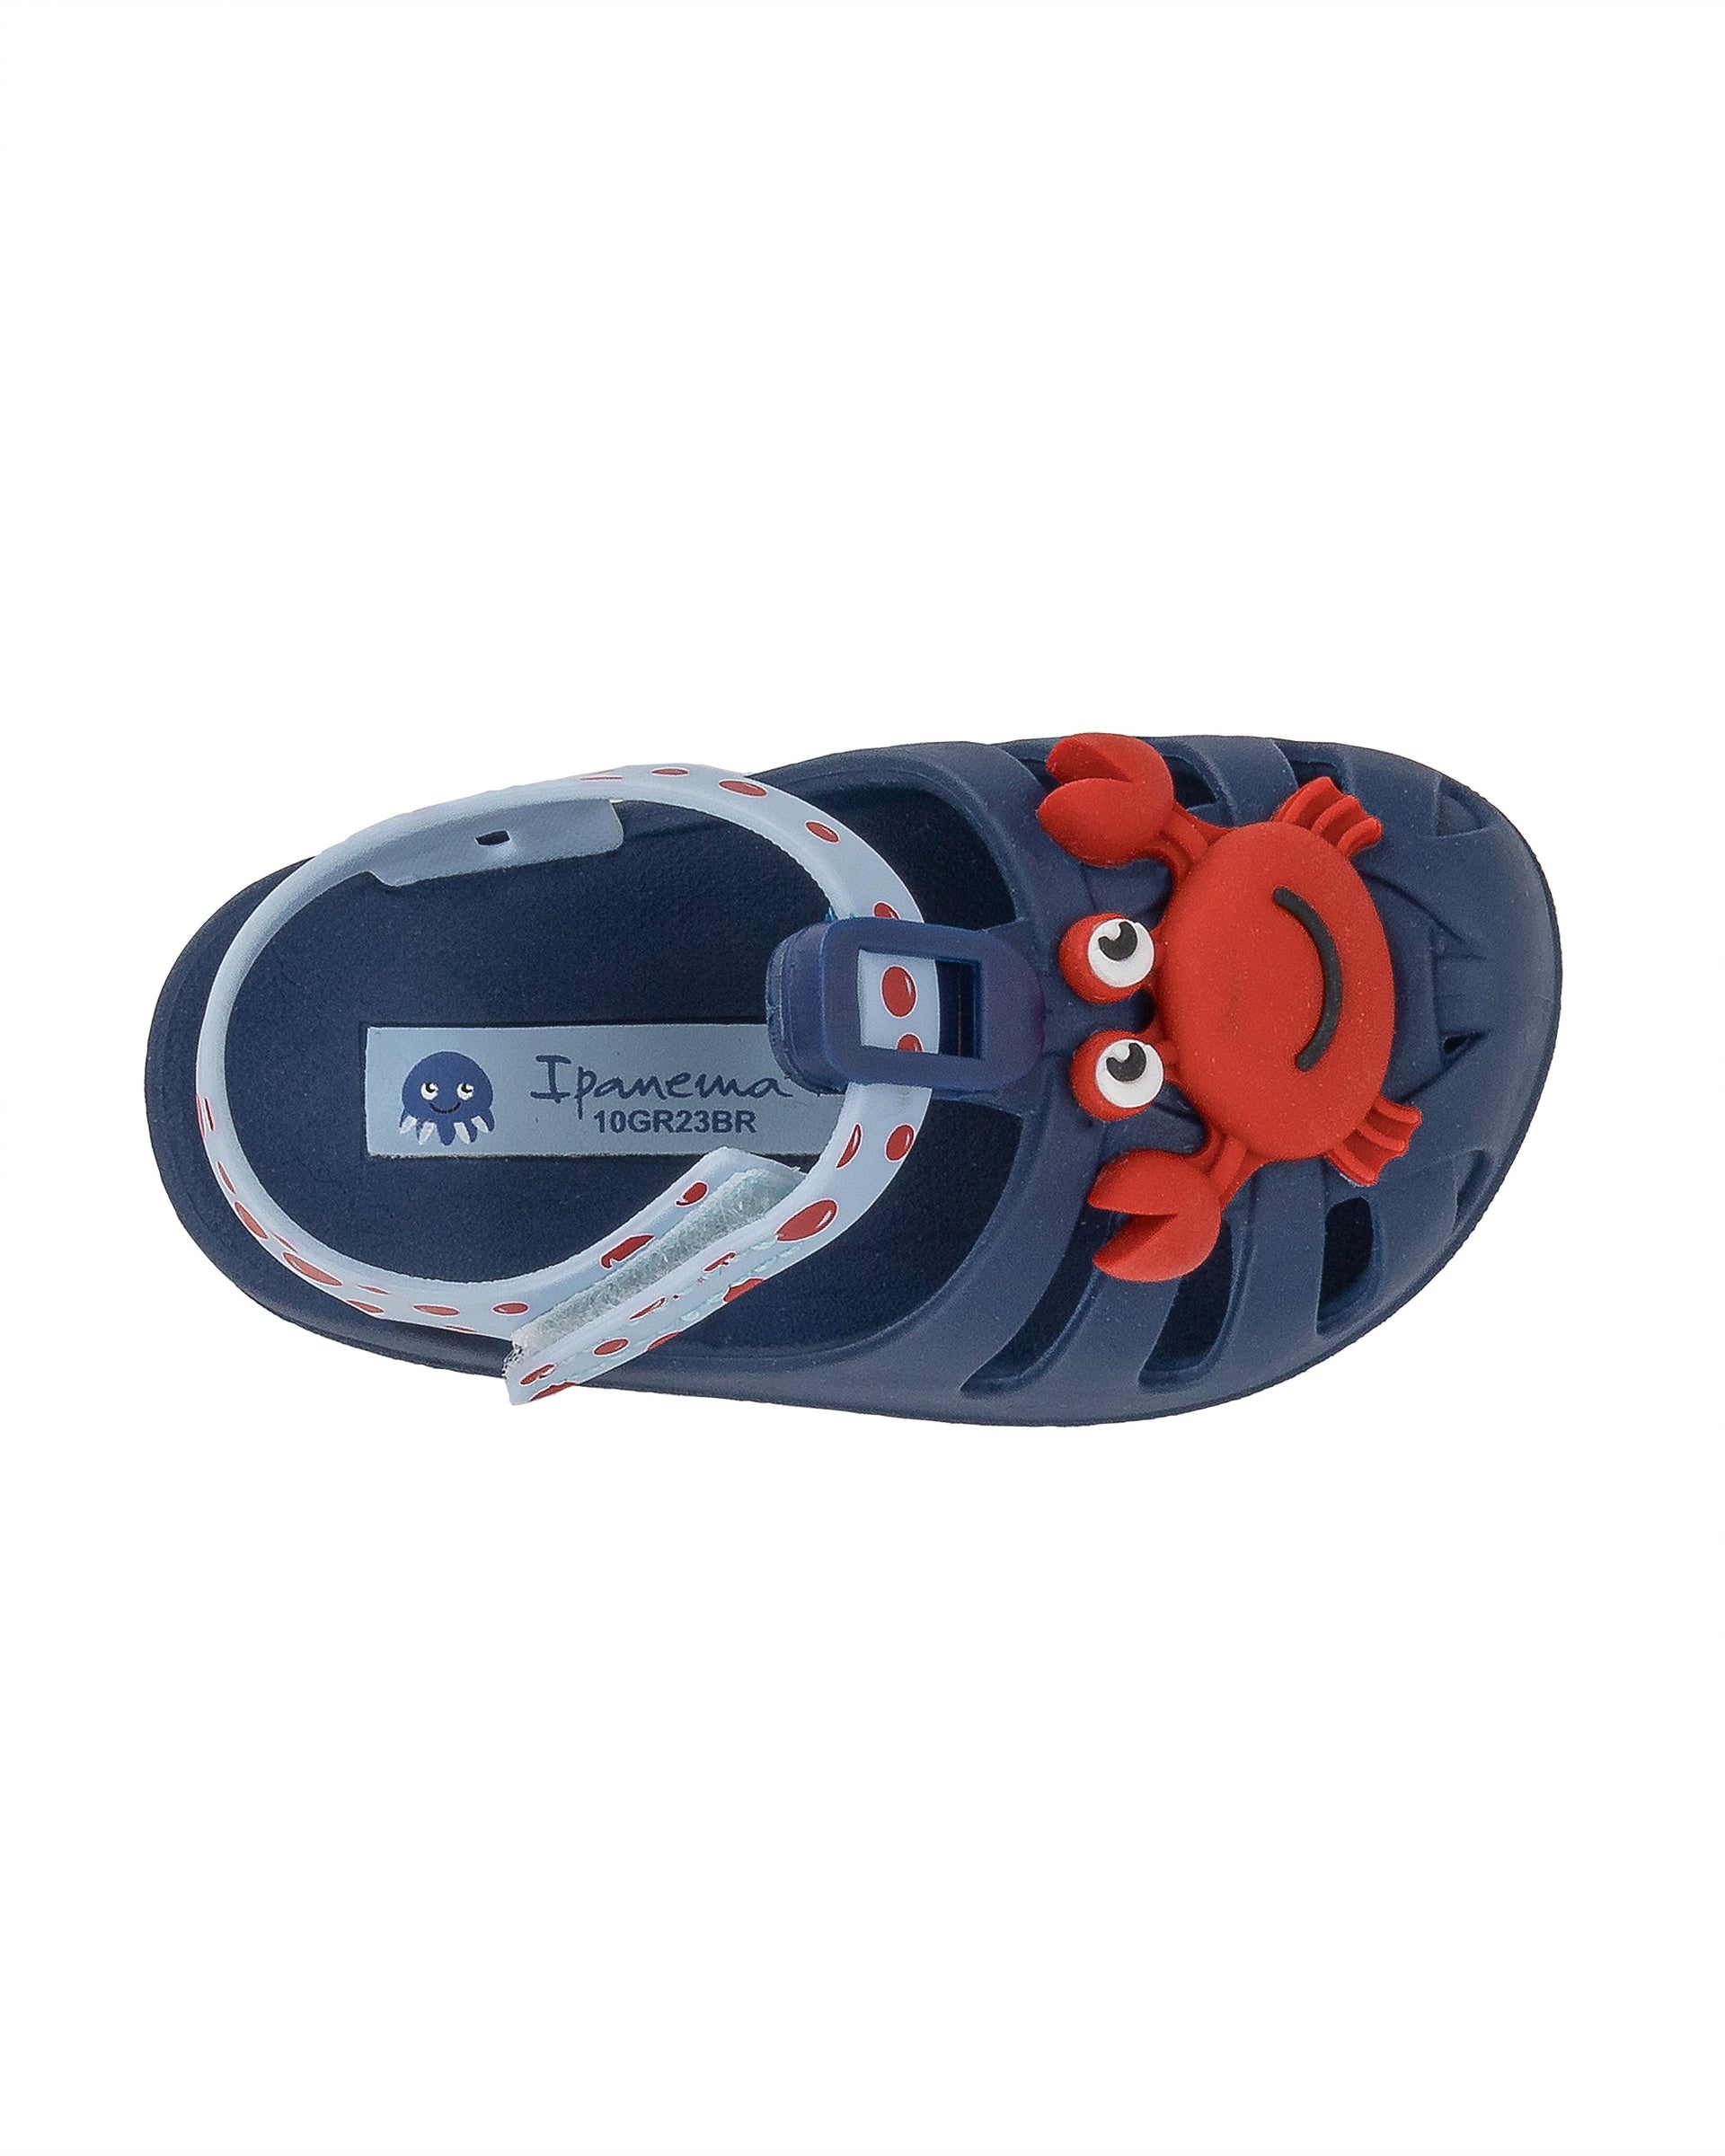 Top view of a blue/light blue Ipanema Summer baby fisherman sandal with red crab on the upper.